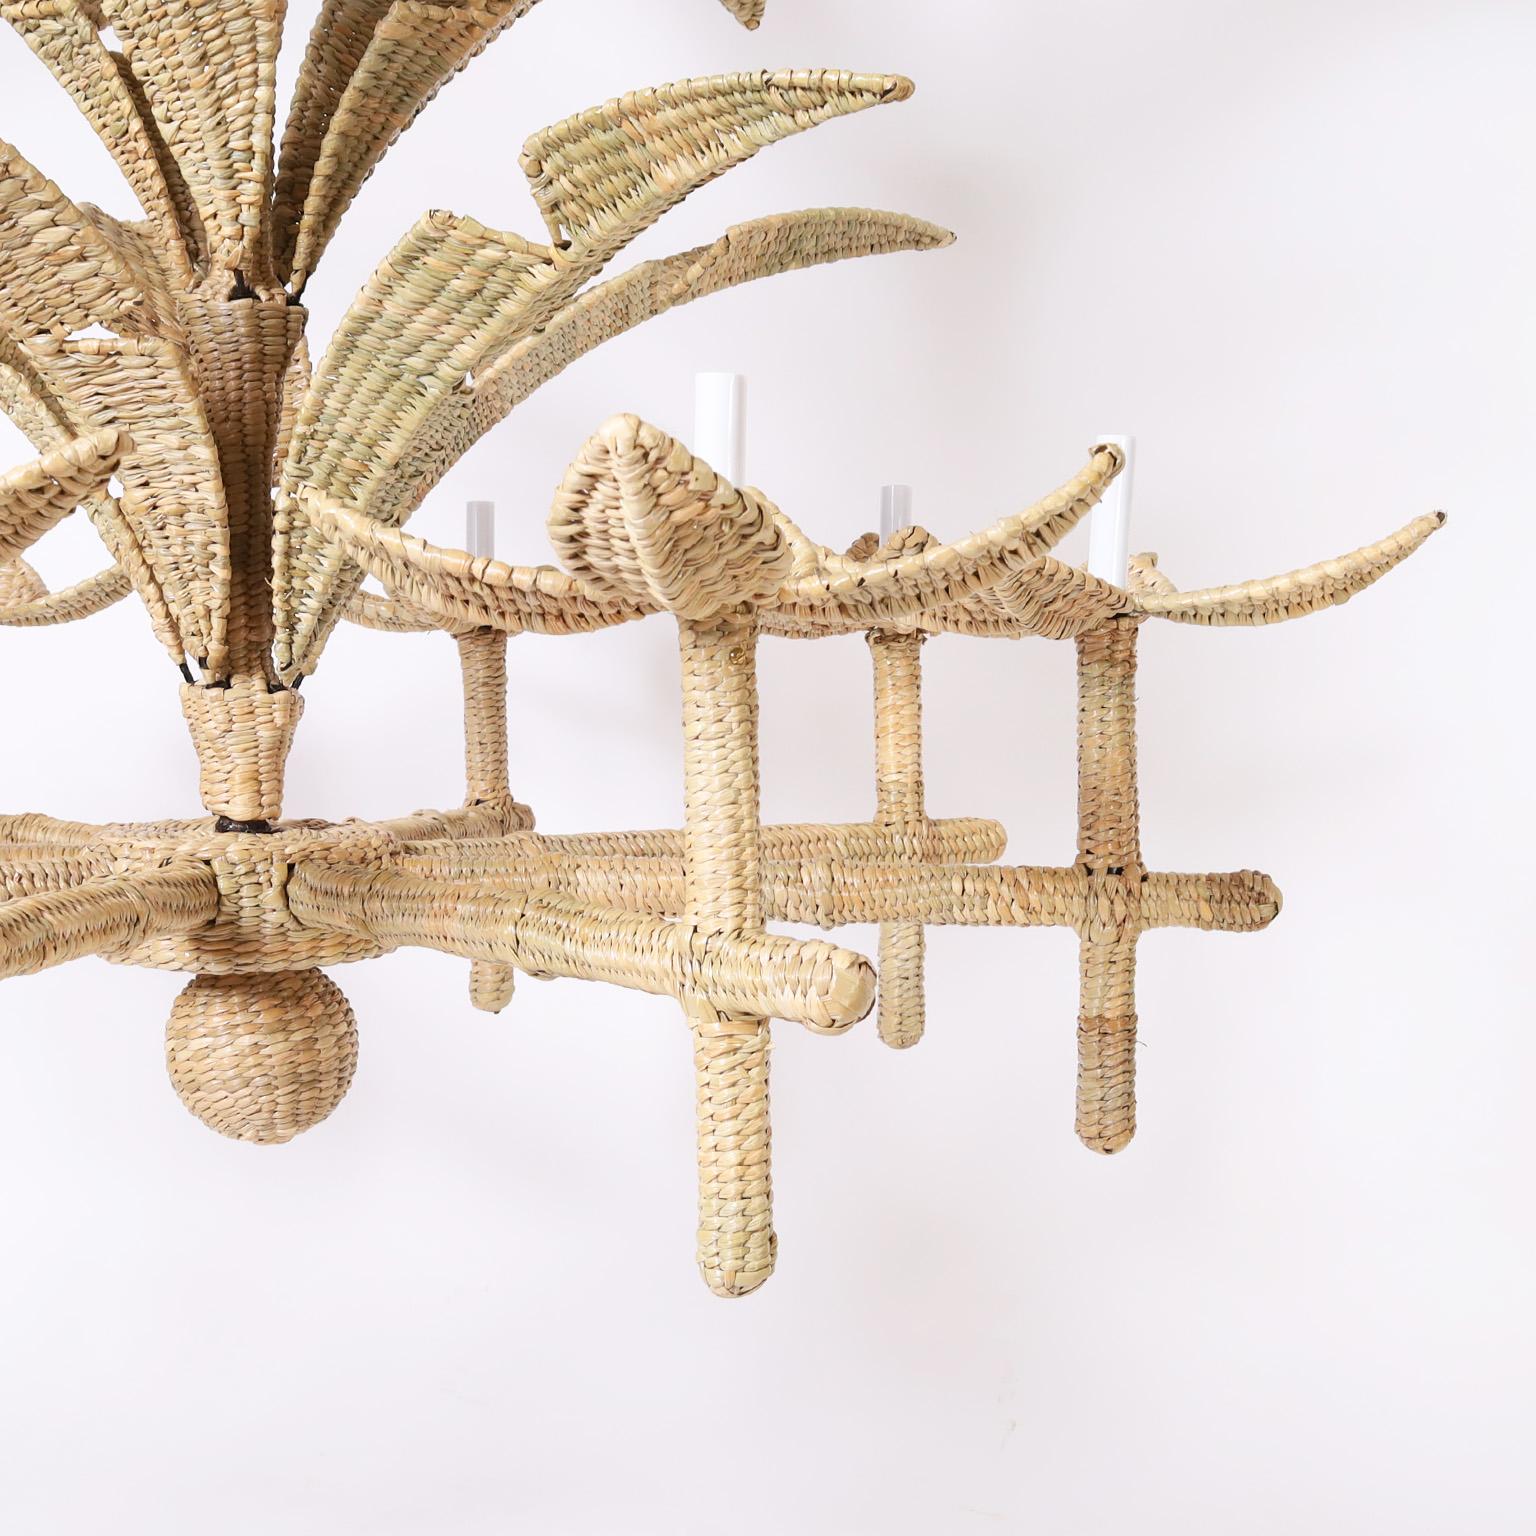 Hand-Crafted Florencia Large Wicker Palm Leaf Chandelier from the FS Flores Collection For Sale